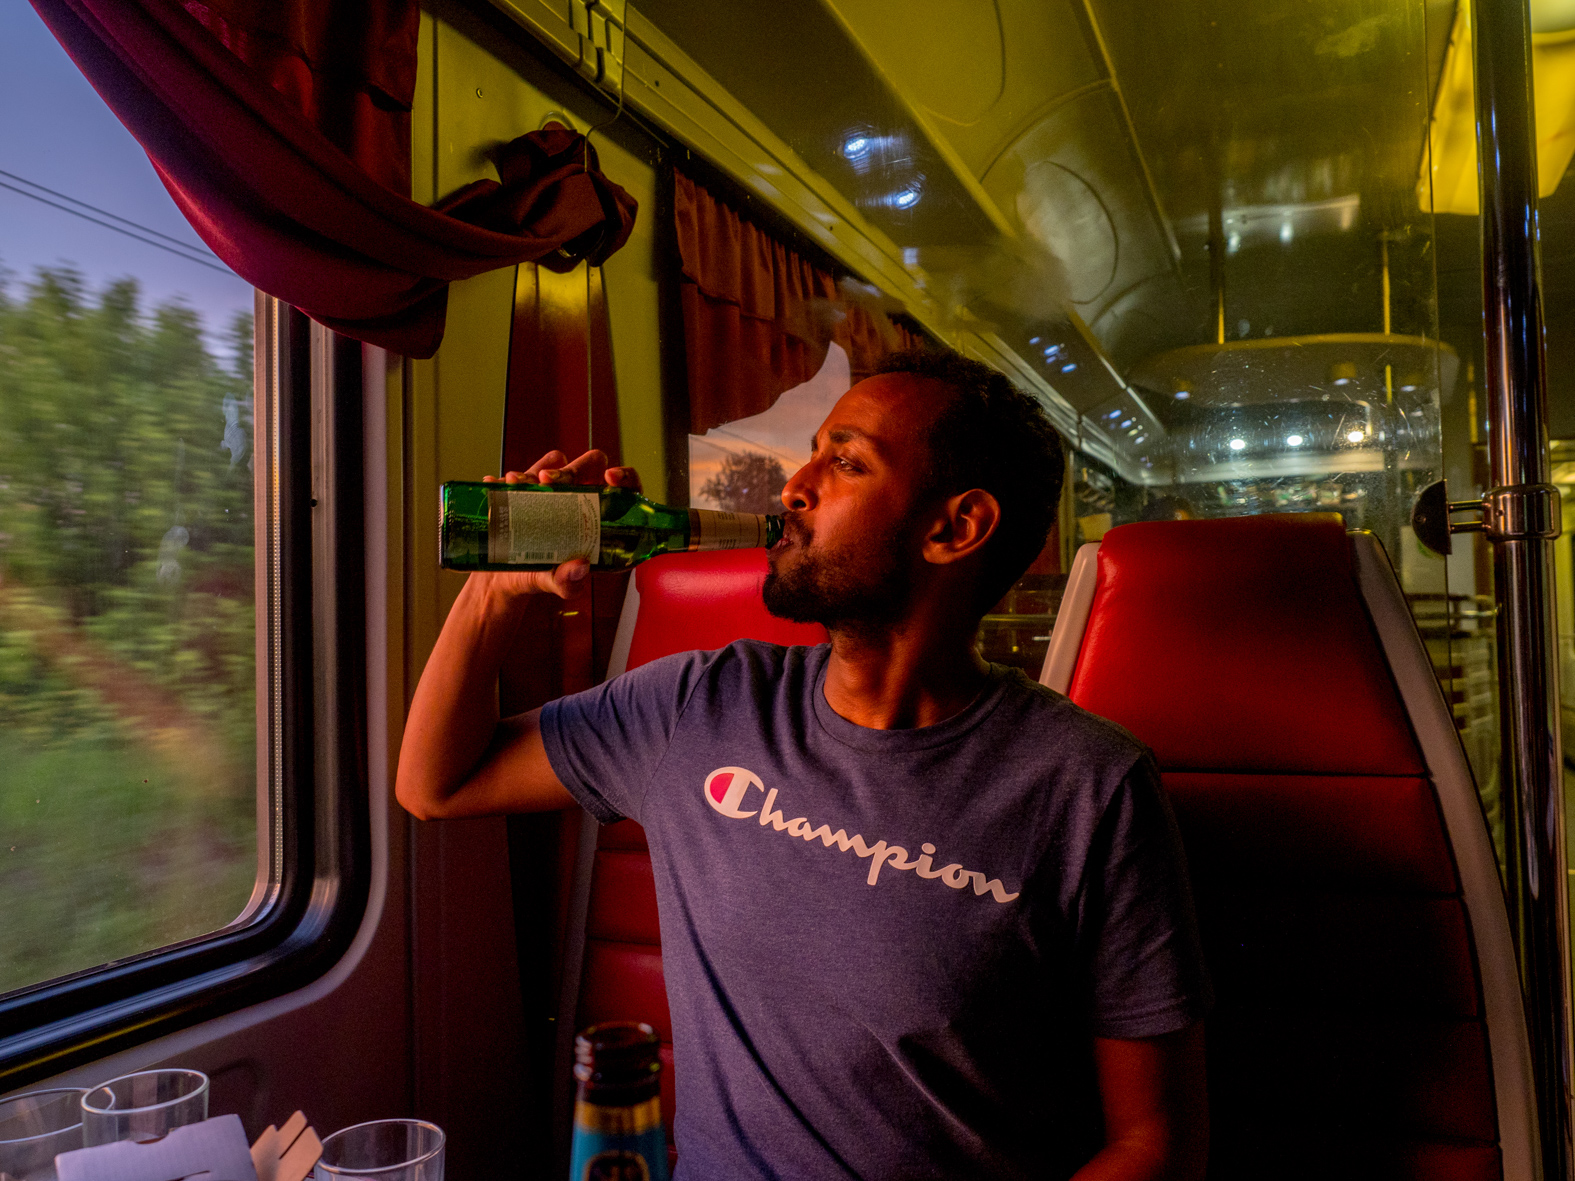 Somalian born, Norwegian national and Arsenal fan, Abdi (aged 27), drinks a beer in the restaurant car on the Trans-Siberian Railway from Moscow-Vladivostok,. Spanning a length of 9,289km, it's the longest uninterrupted single country train journey in the world. It has connected Moscow with Vladivostok since 1916, and is still being expanded. It was built between 1891 and 1916 under the supervision of Russian government ministers personally appointed by Tsar Alexander III and his son, the Tsarevich Nicholas (later Tsar Nicholas II).